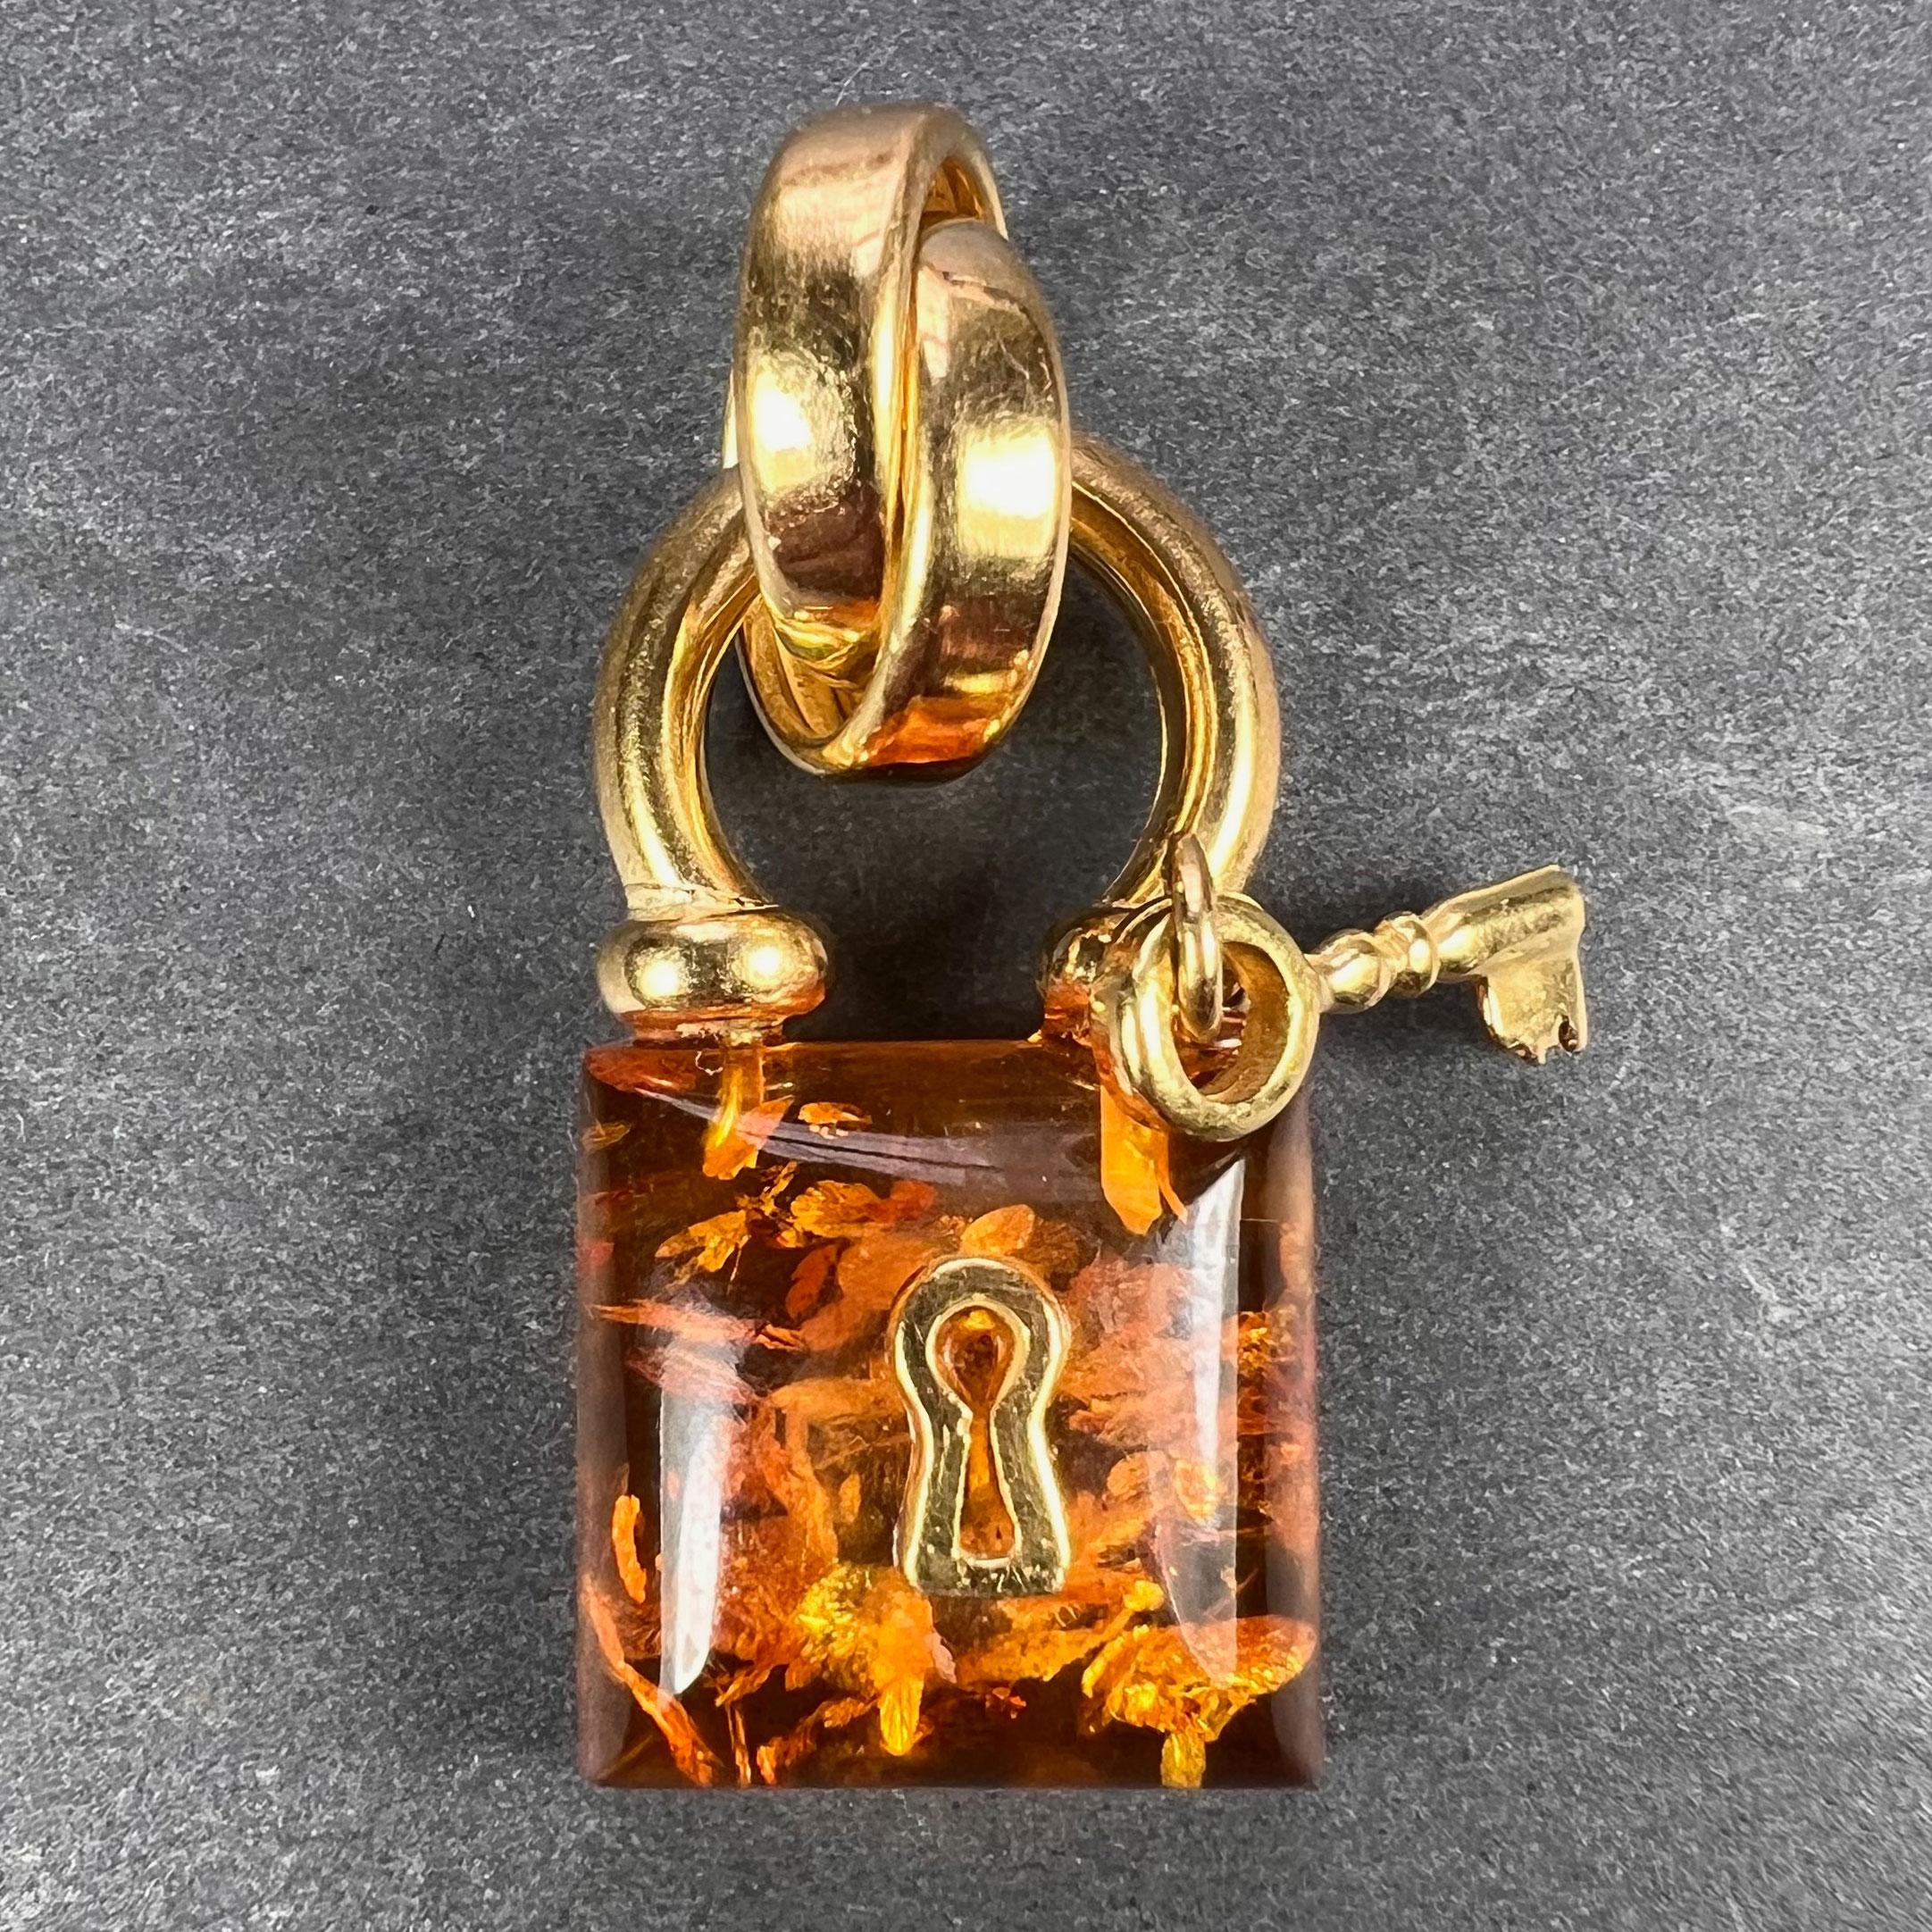 An 18 karat (18K) yellow gold and clarified amber charm pendant designed as a padlock with key. Stamped with the owl mark for French import and 18 karat gold.

Dimensions: 3.3 x 1.4 x 0.75 cm (not including jump ring)
Weight: 3.83 grams